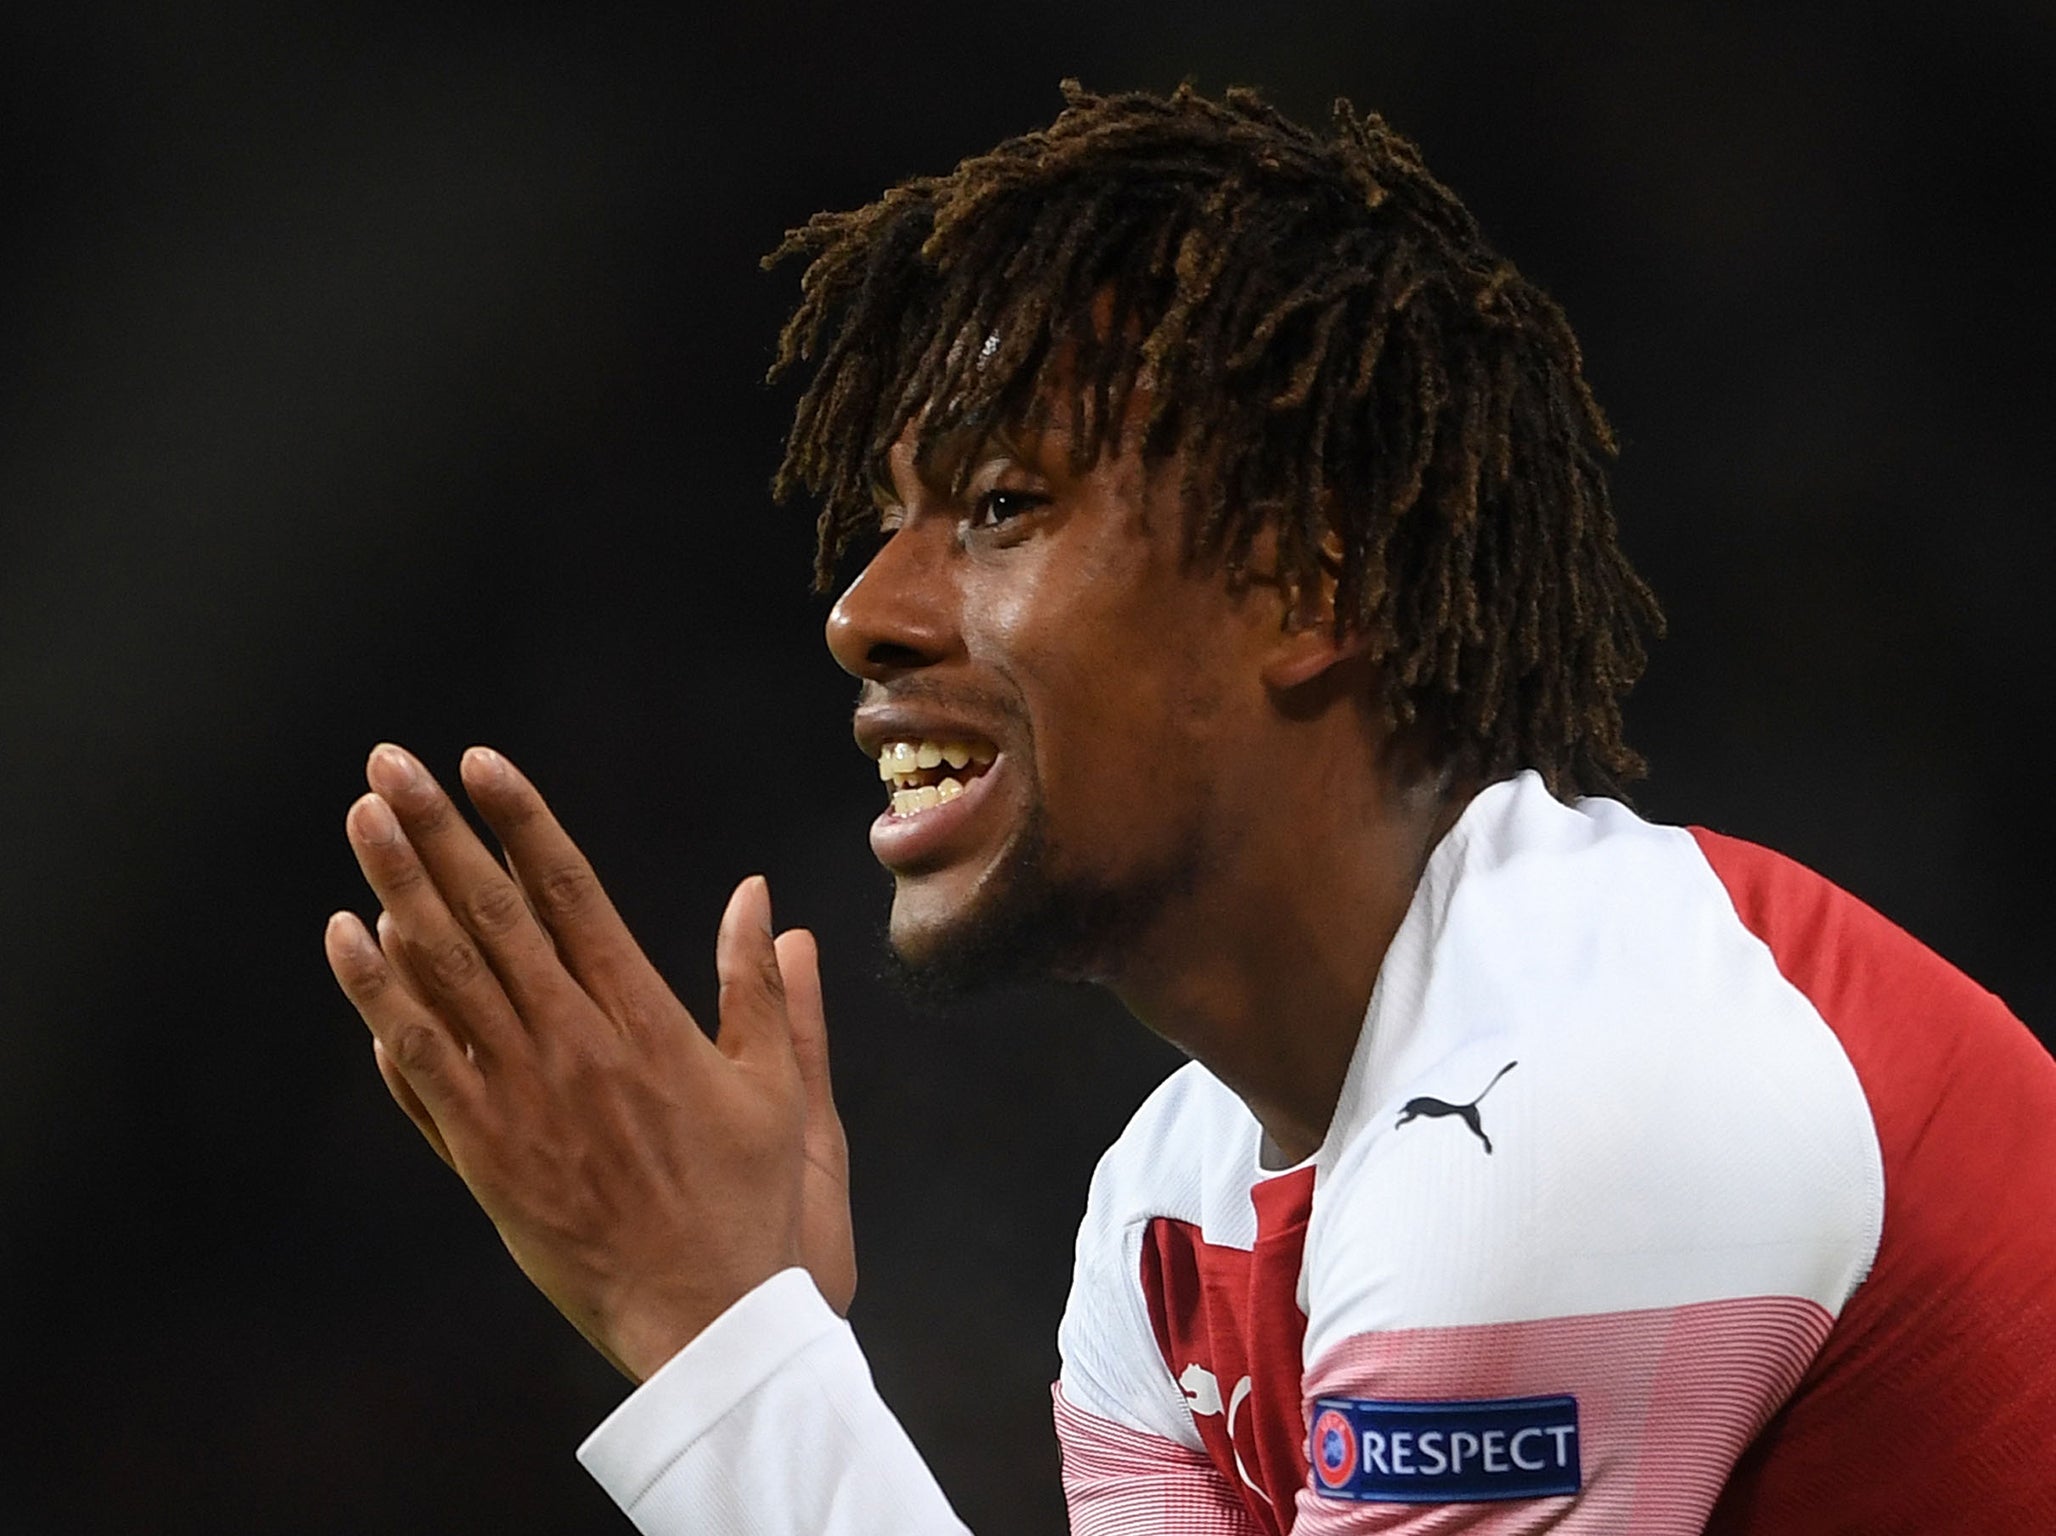 Alex Iwobi is often a target for criticism (Arsenal FC via Getty)